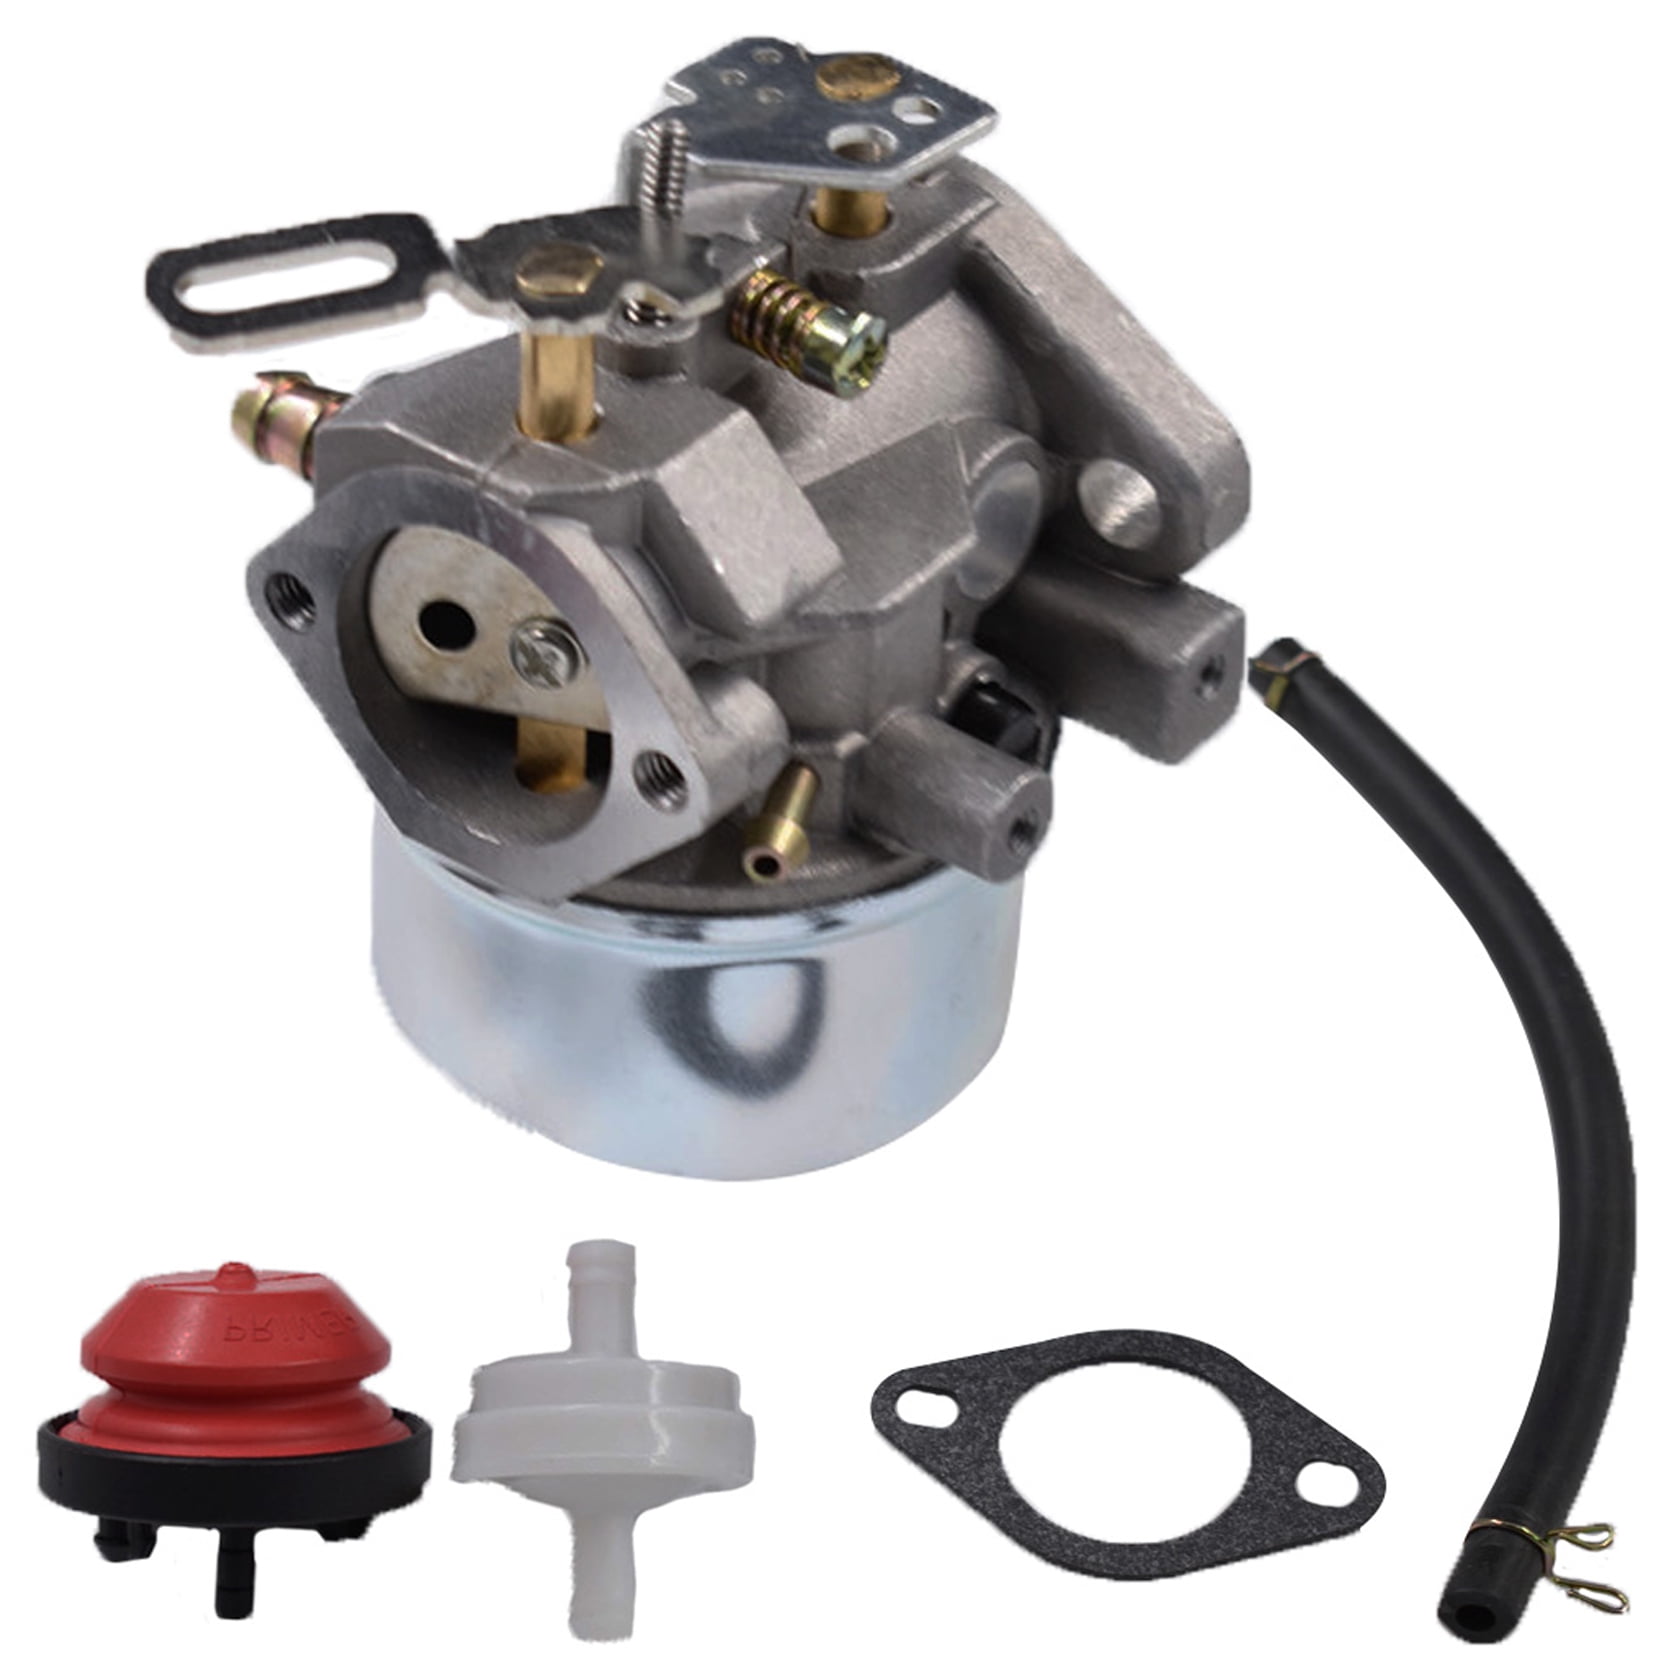 Details about   For Ariens ST420 Snow Thrower 922006 922012 922018 922999 932023 Carburetor Carb 